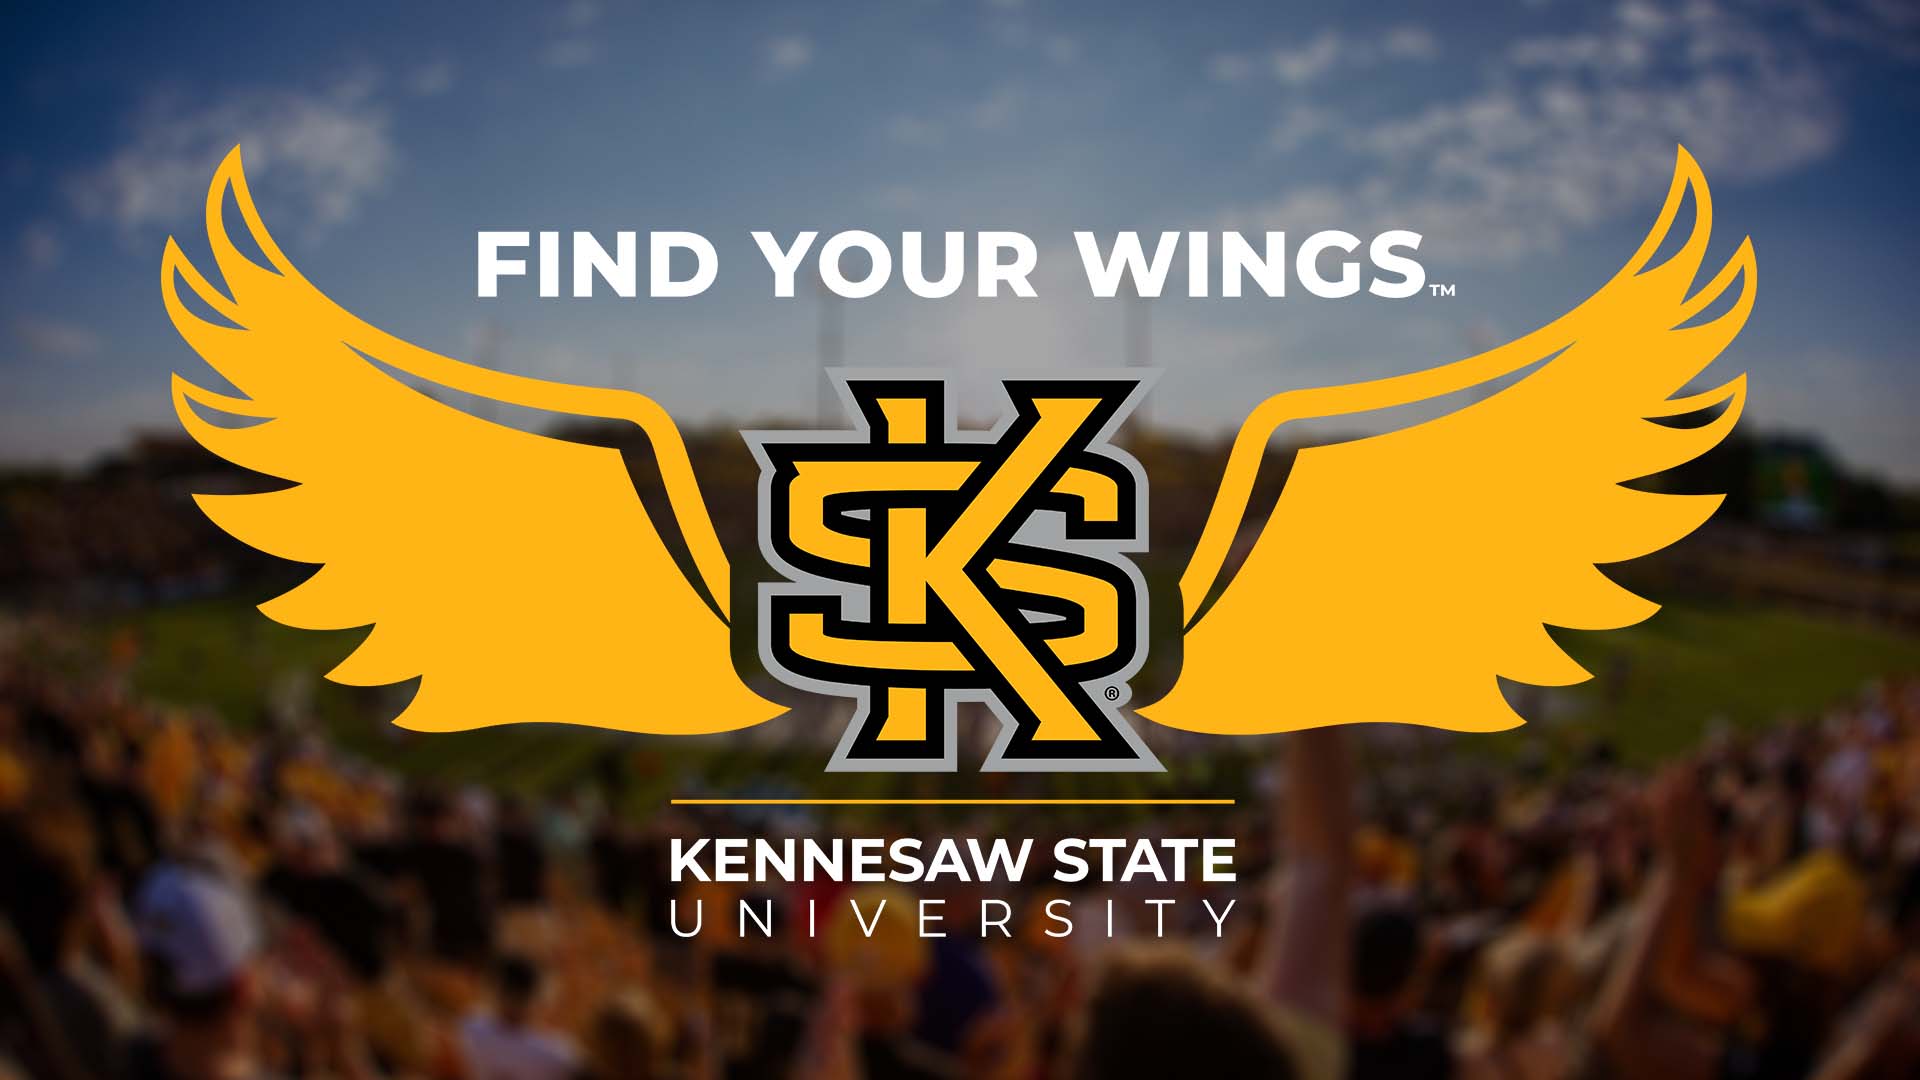 Find your wings branding image